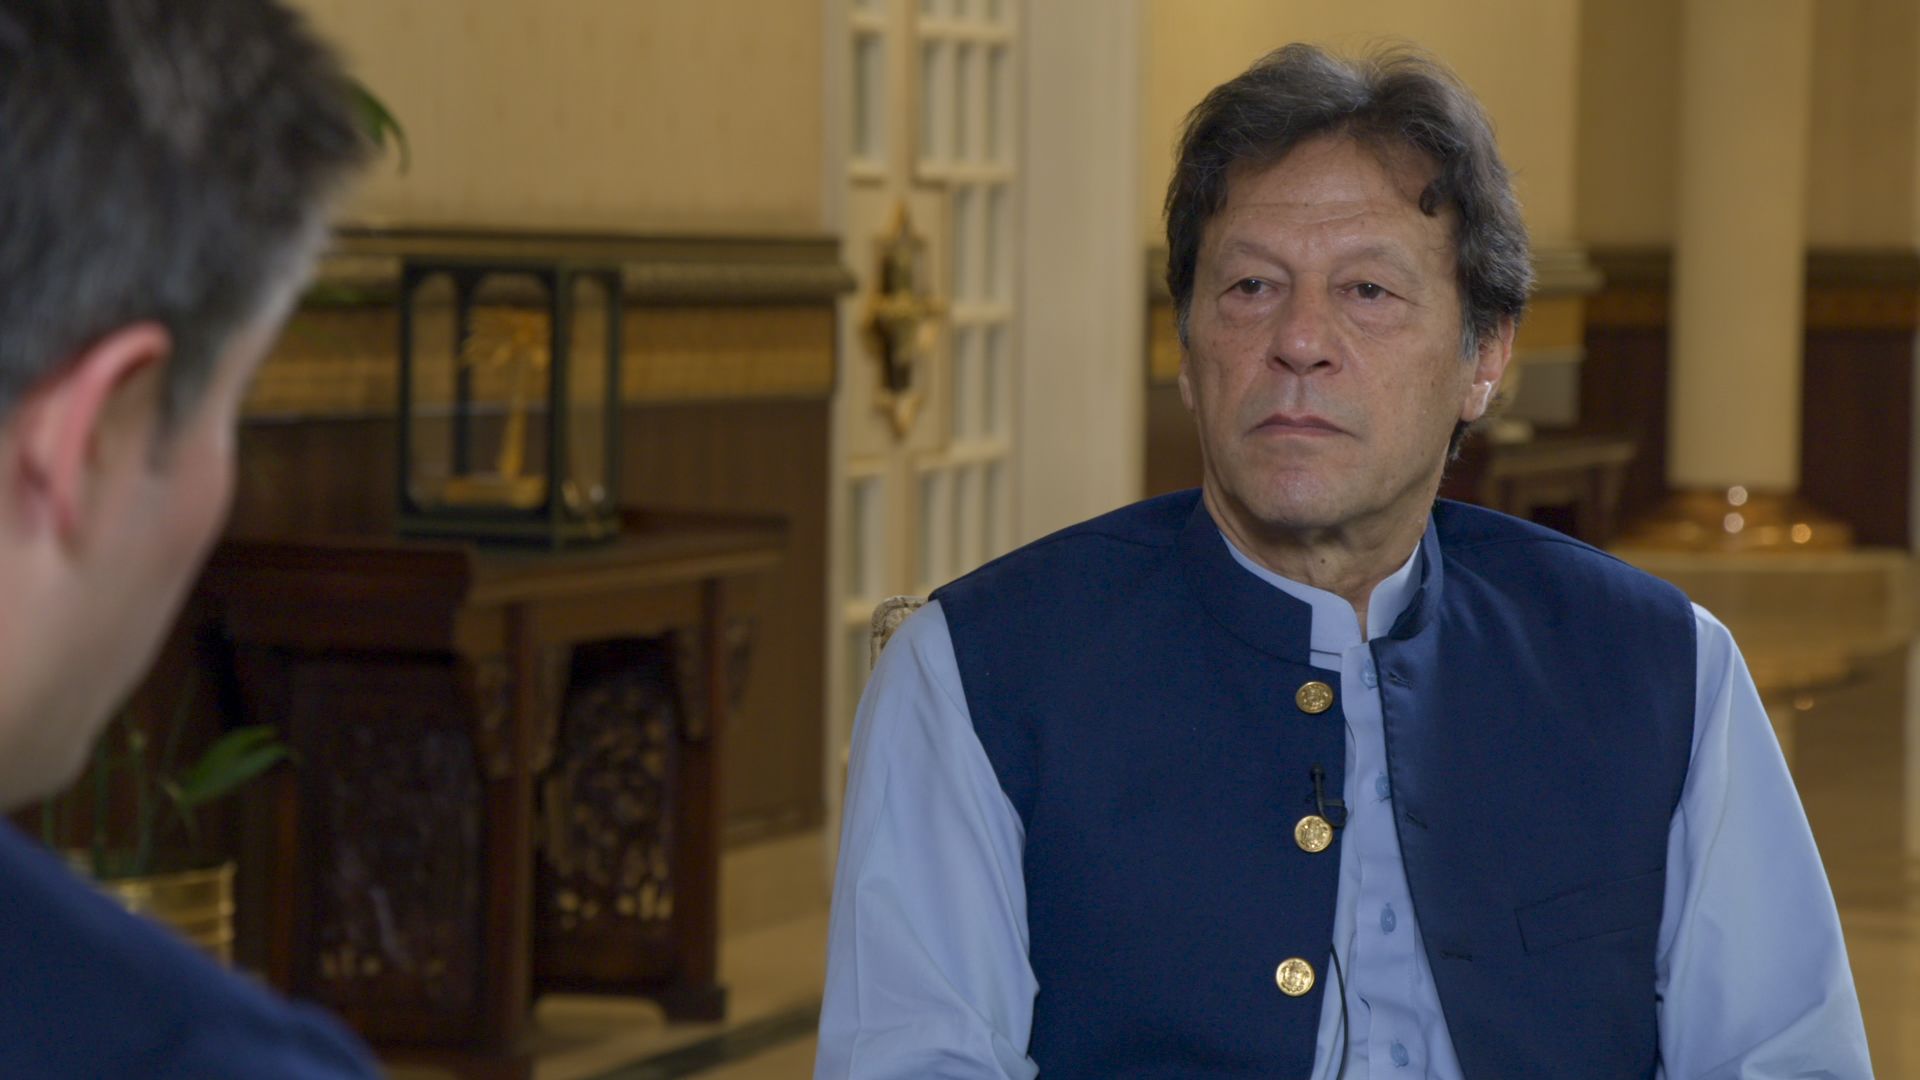 Pakistan Prime Minister Imran Khan is seen during an interview for "Axios on HBO."